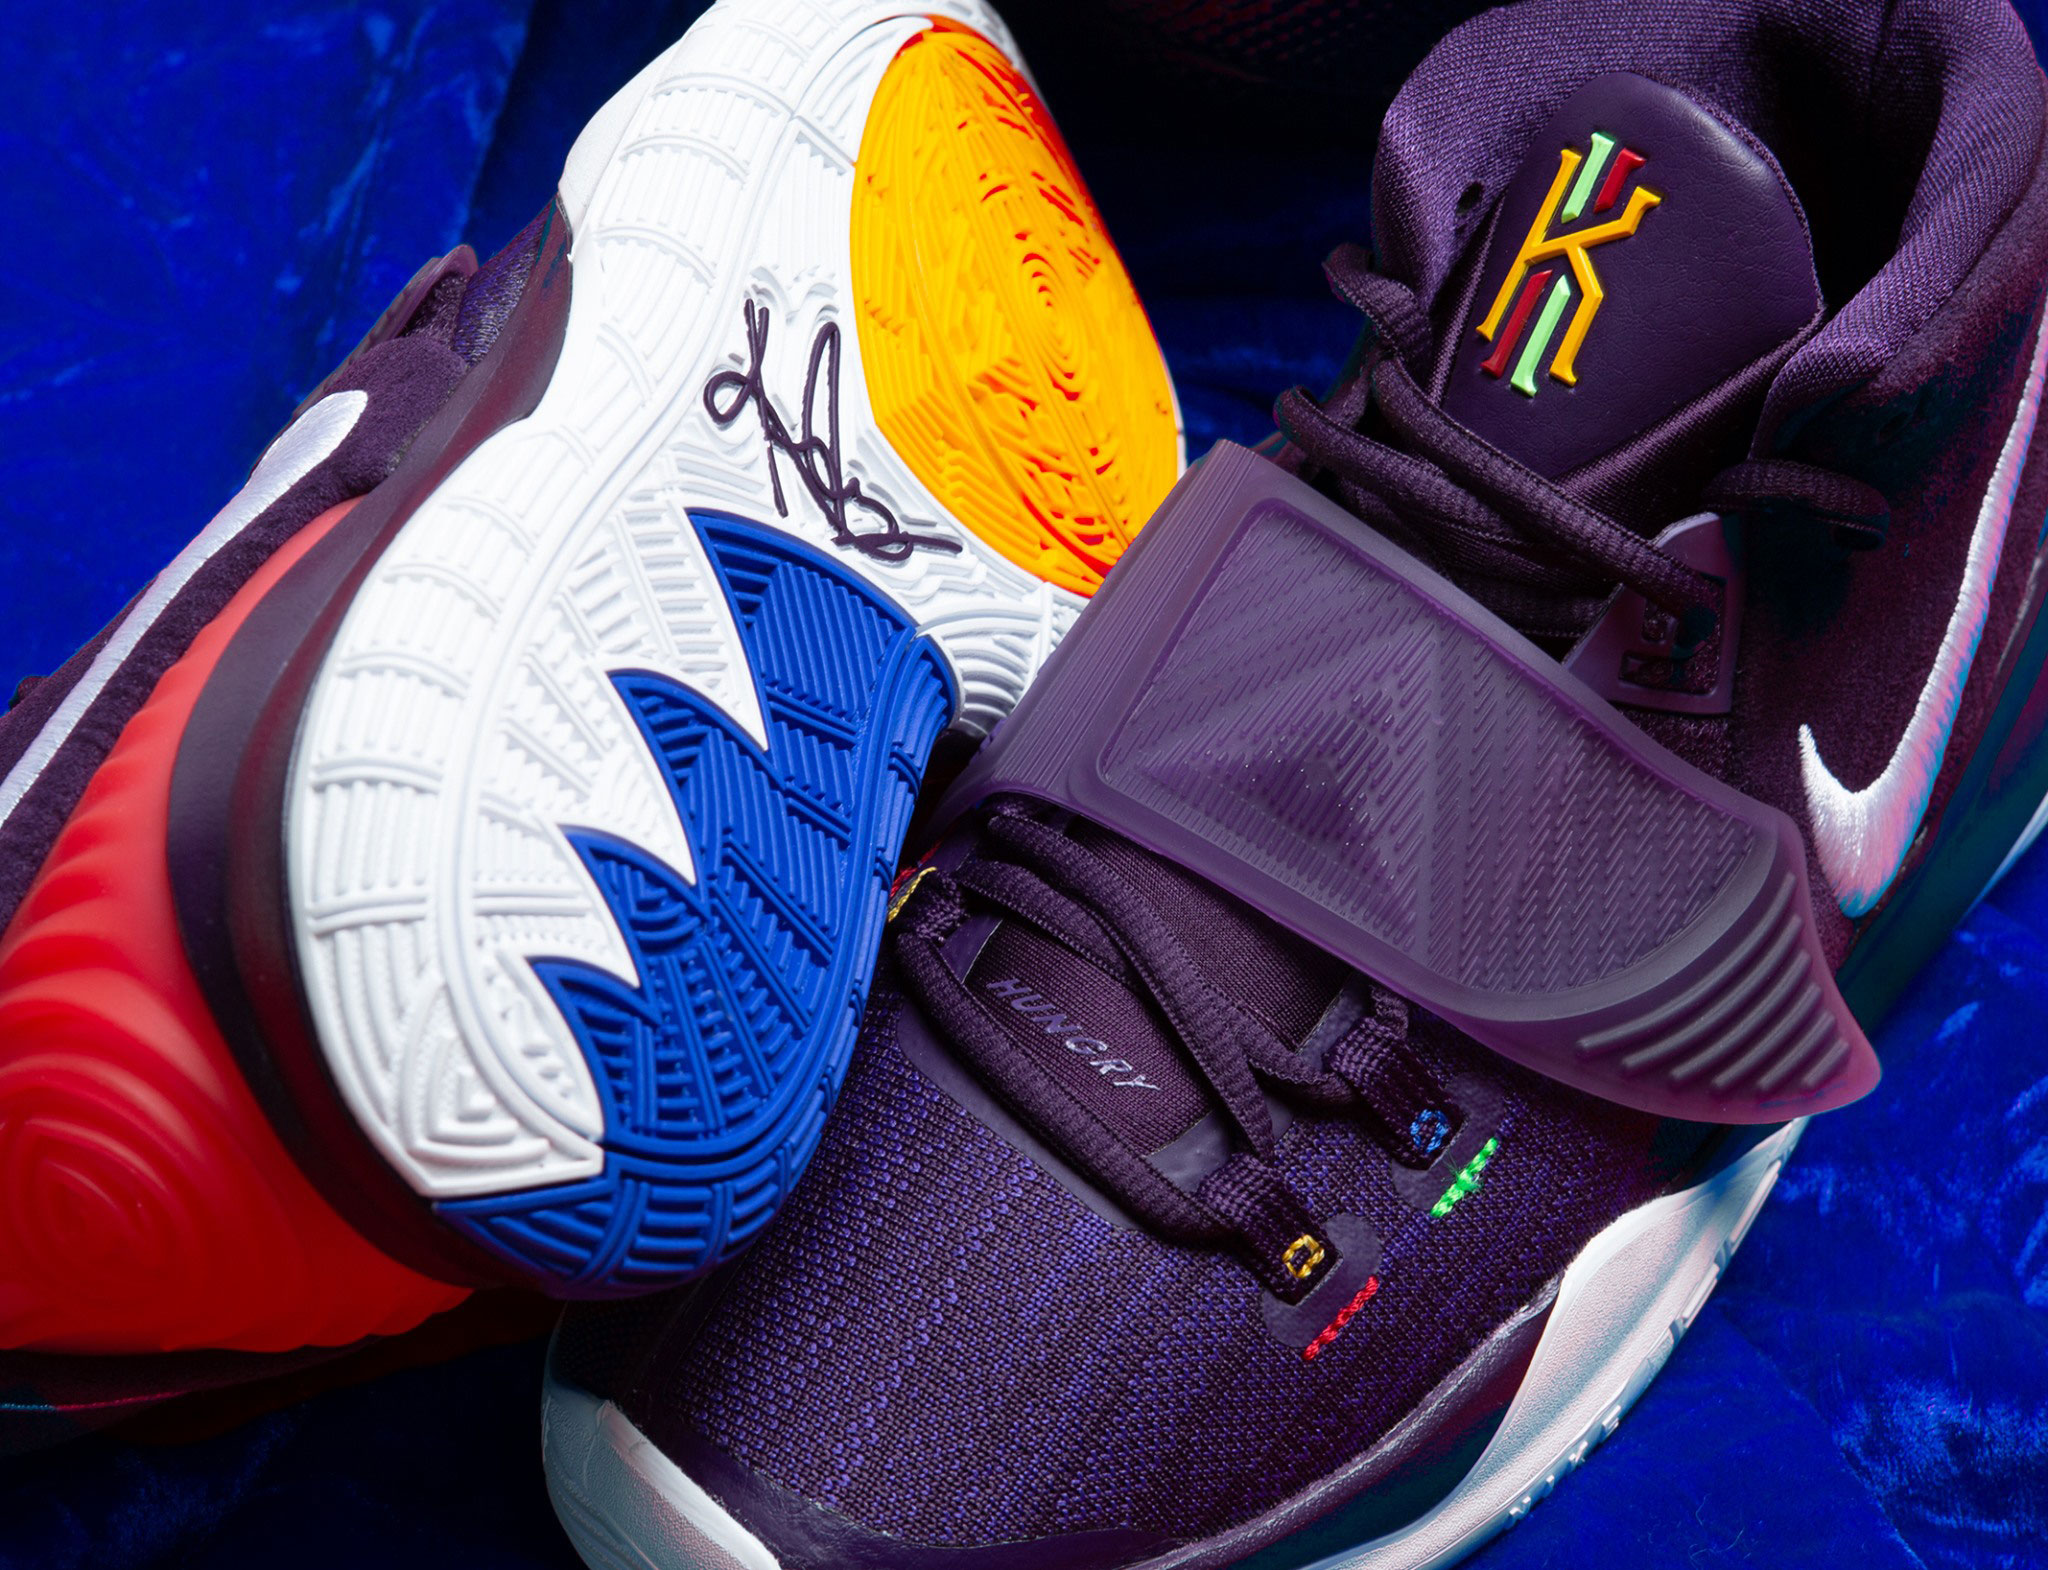 kyrie irving 6 purple shoes